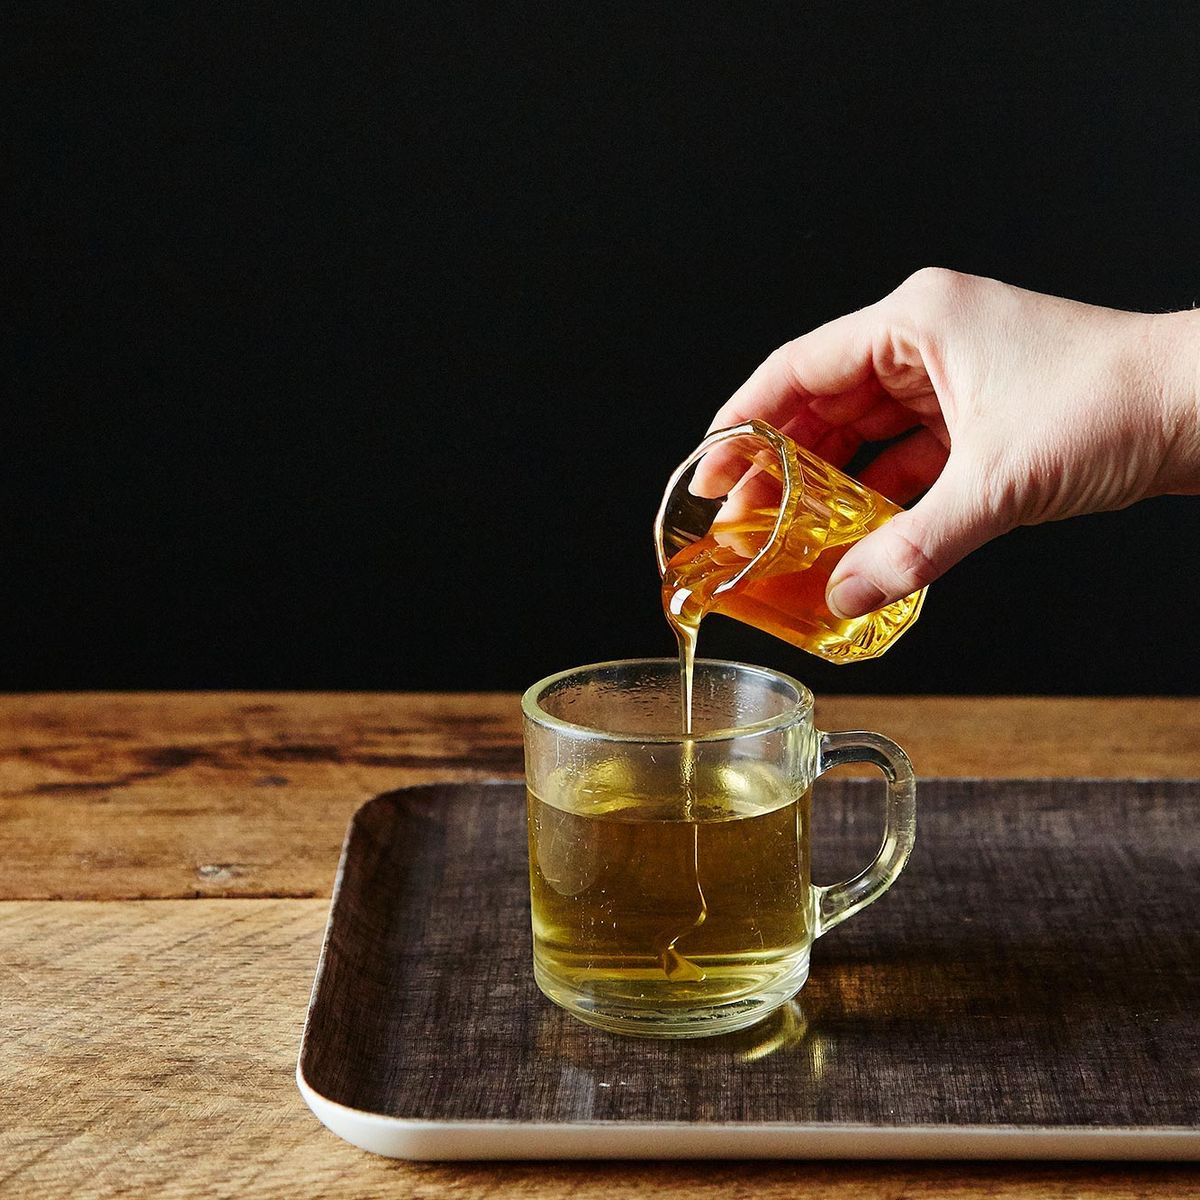 How to Make a Hot Toddy - Winter Drinks